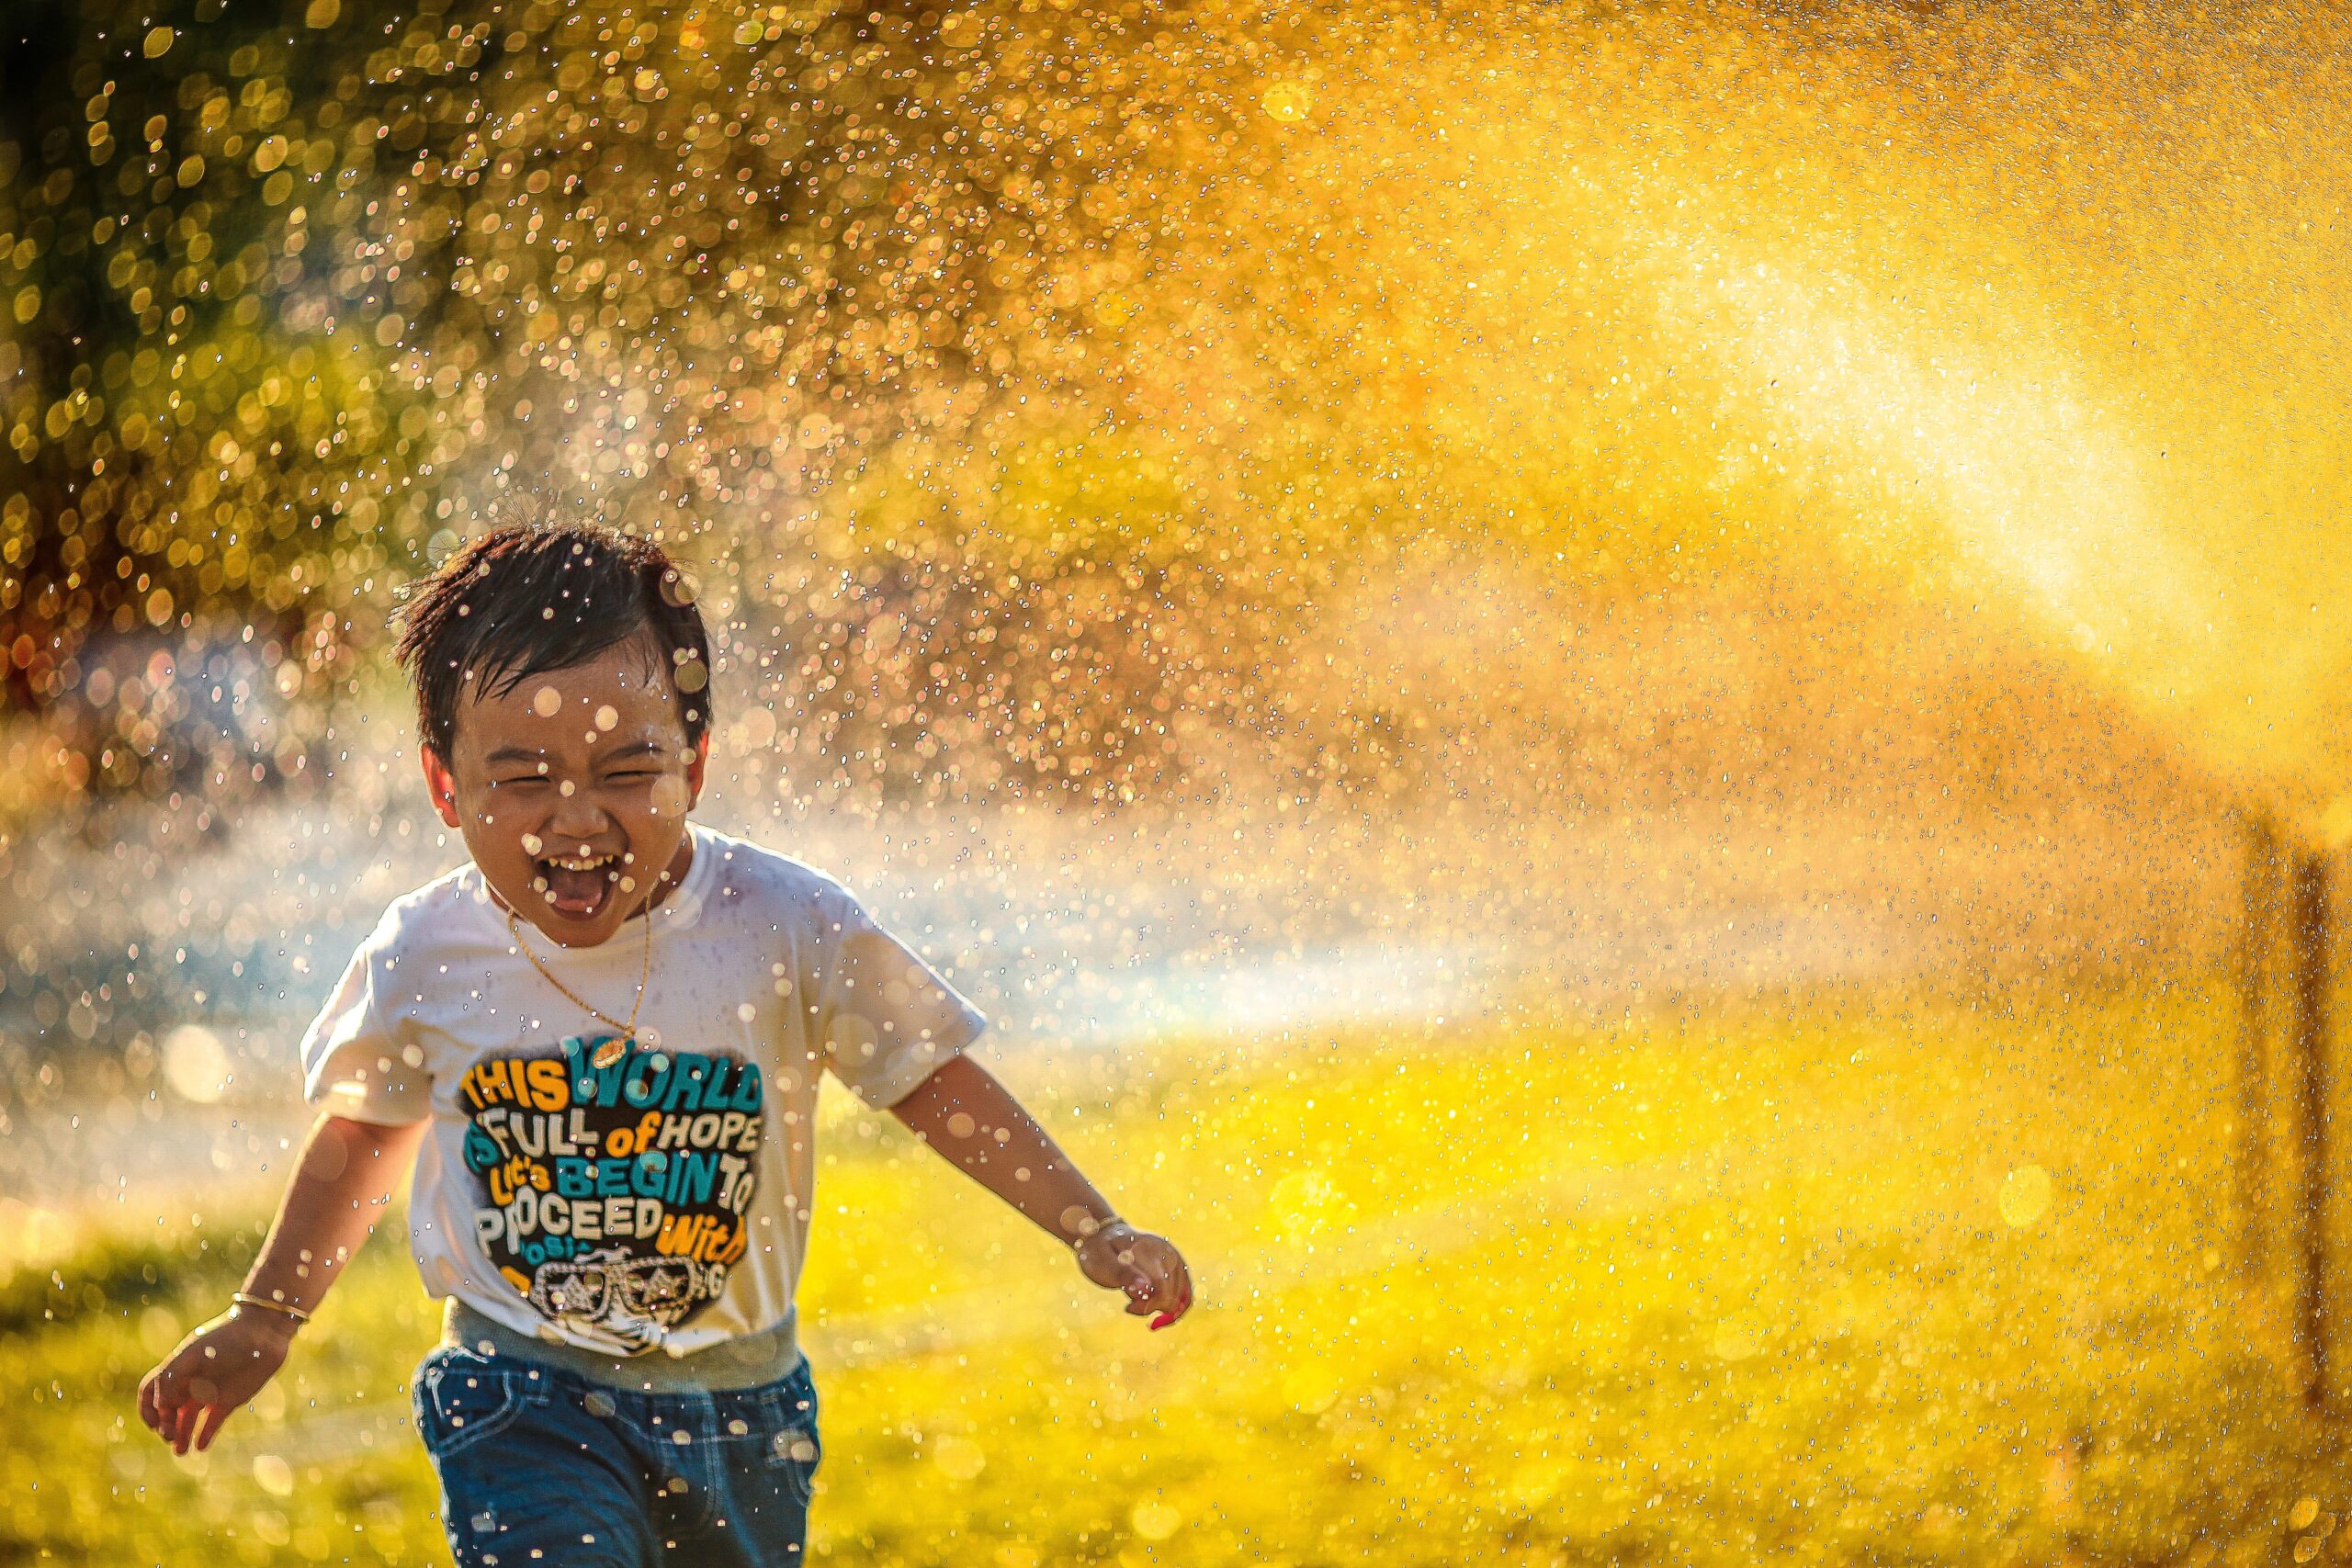 a small child running through sprinklers, a huge smile on their face.